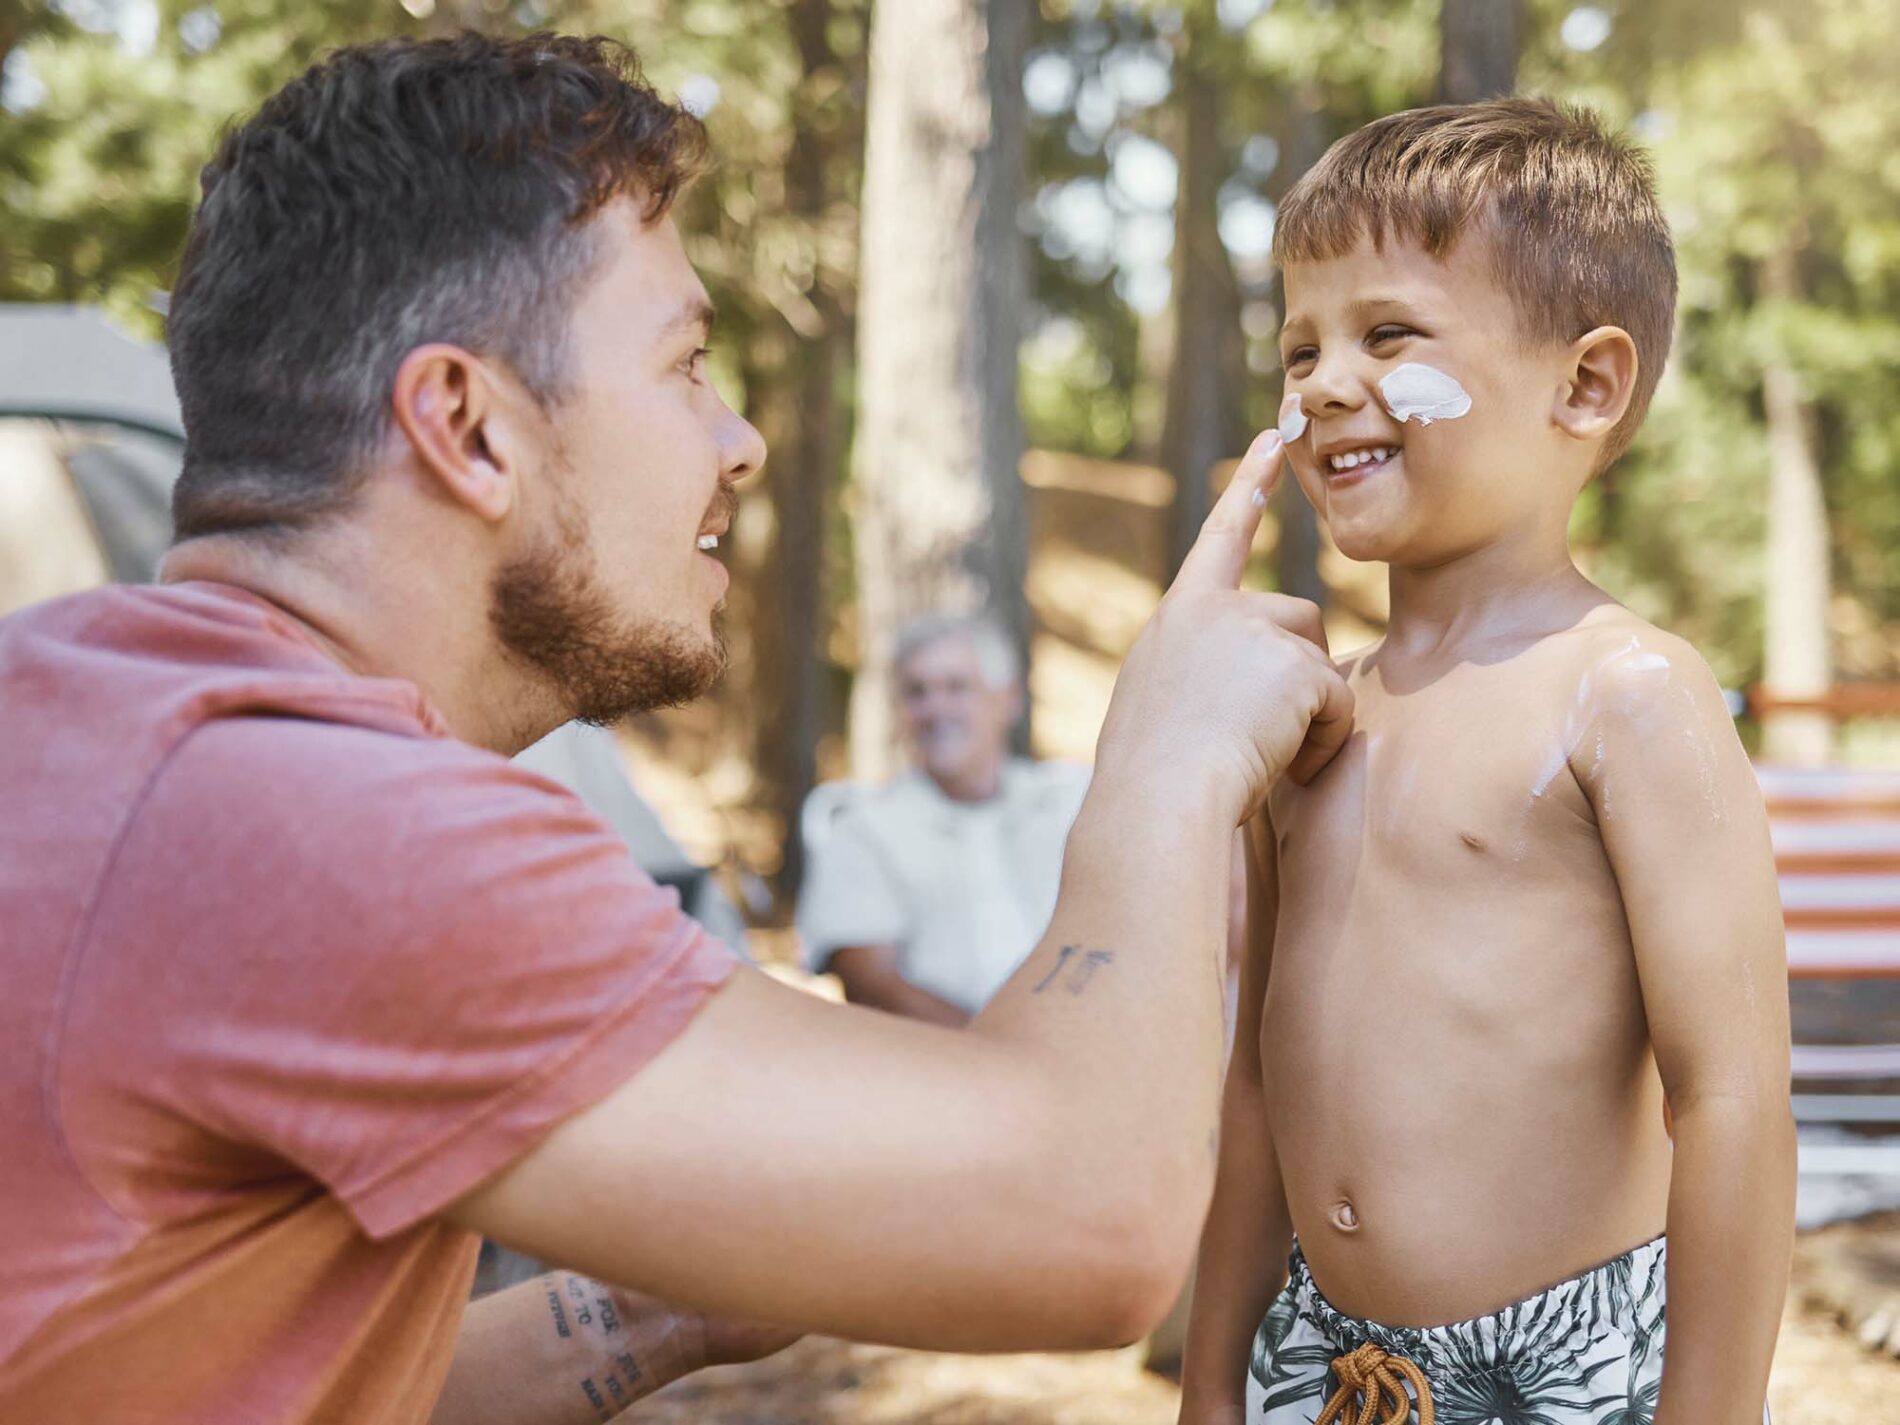 Father putting sun cream on a young boy's face